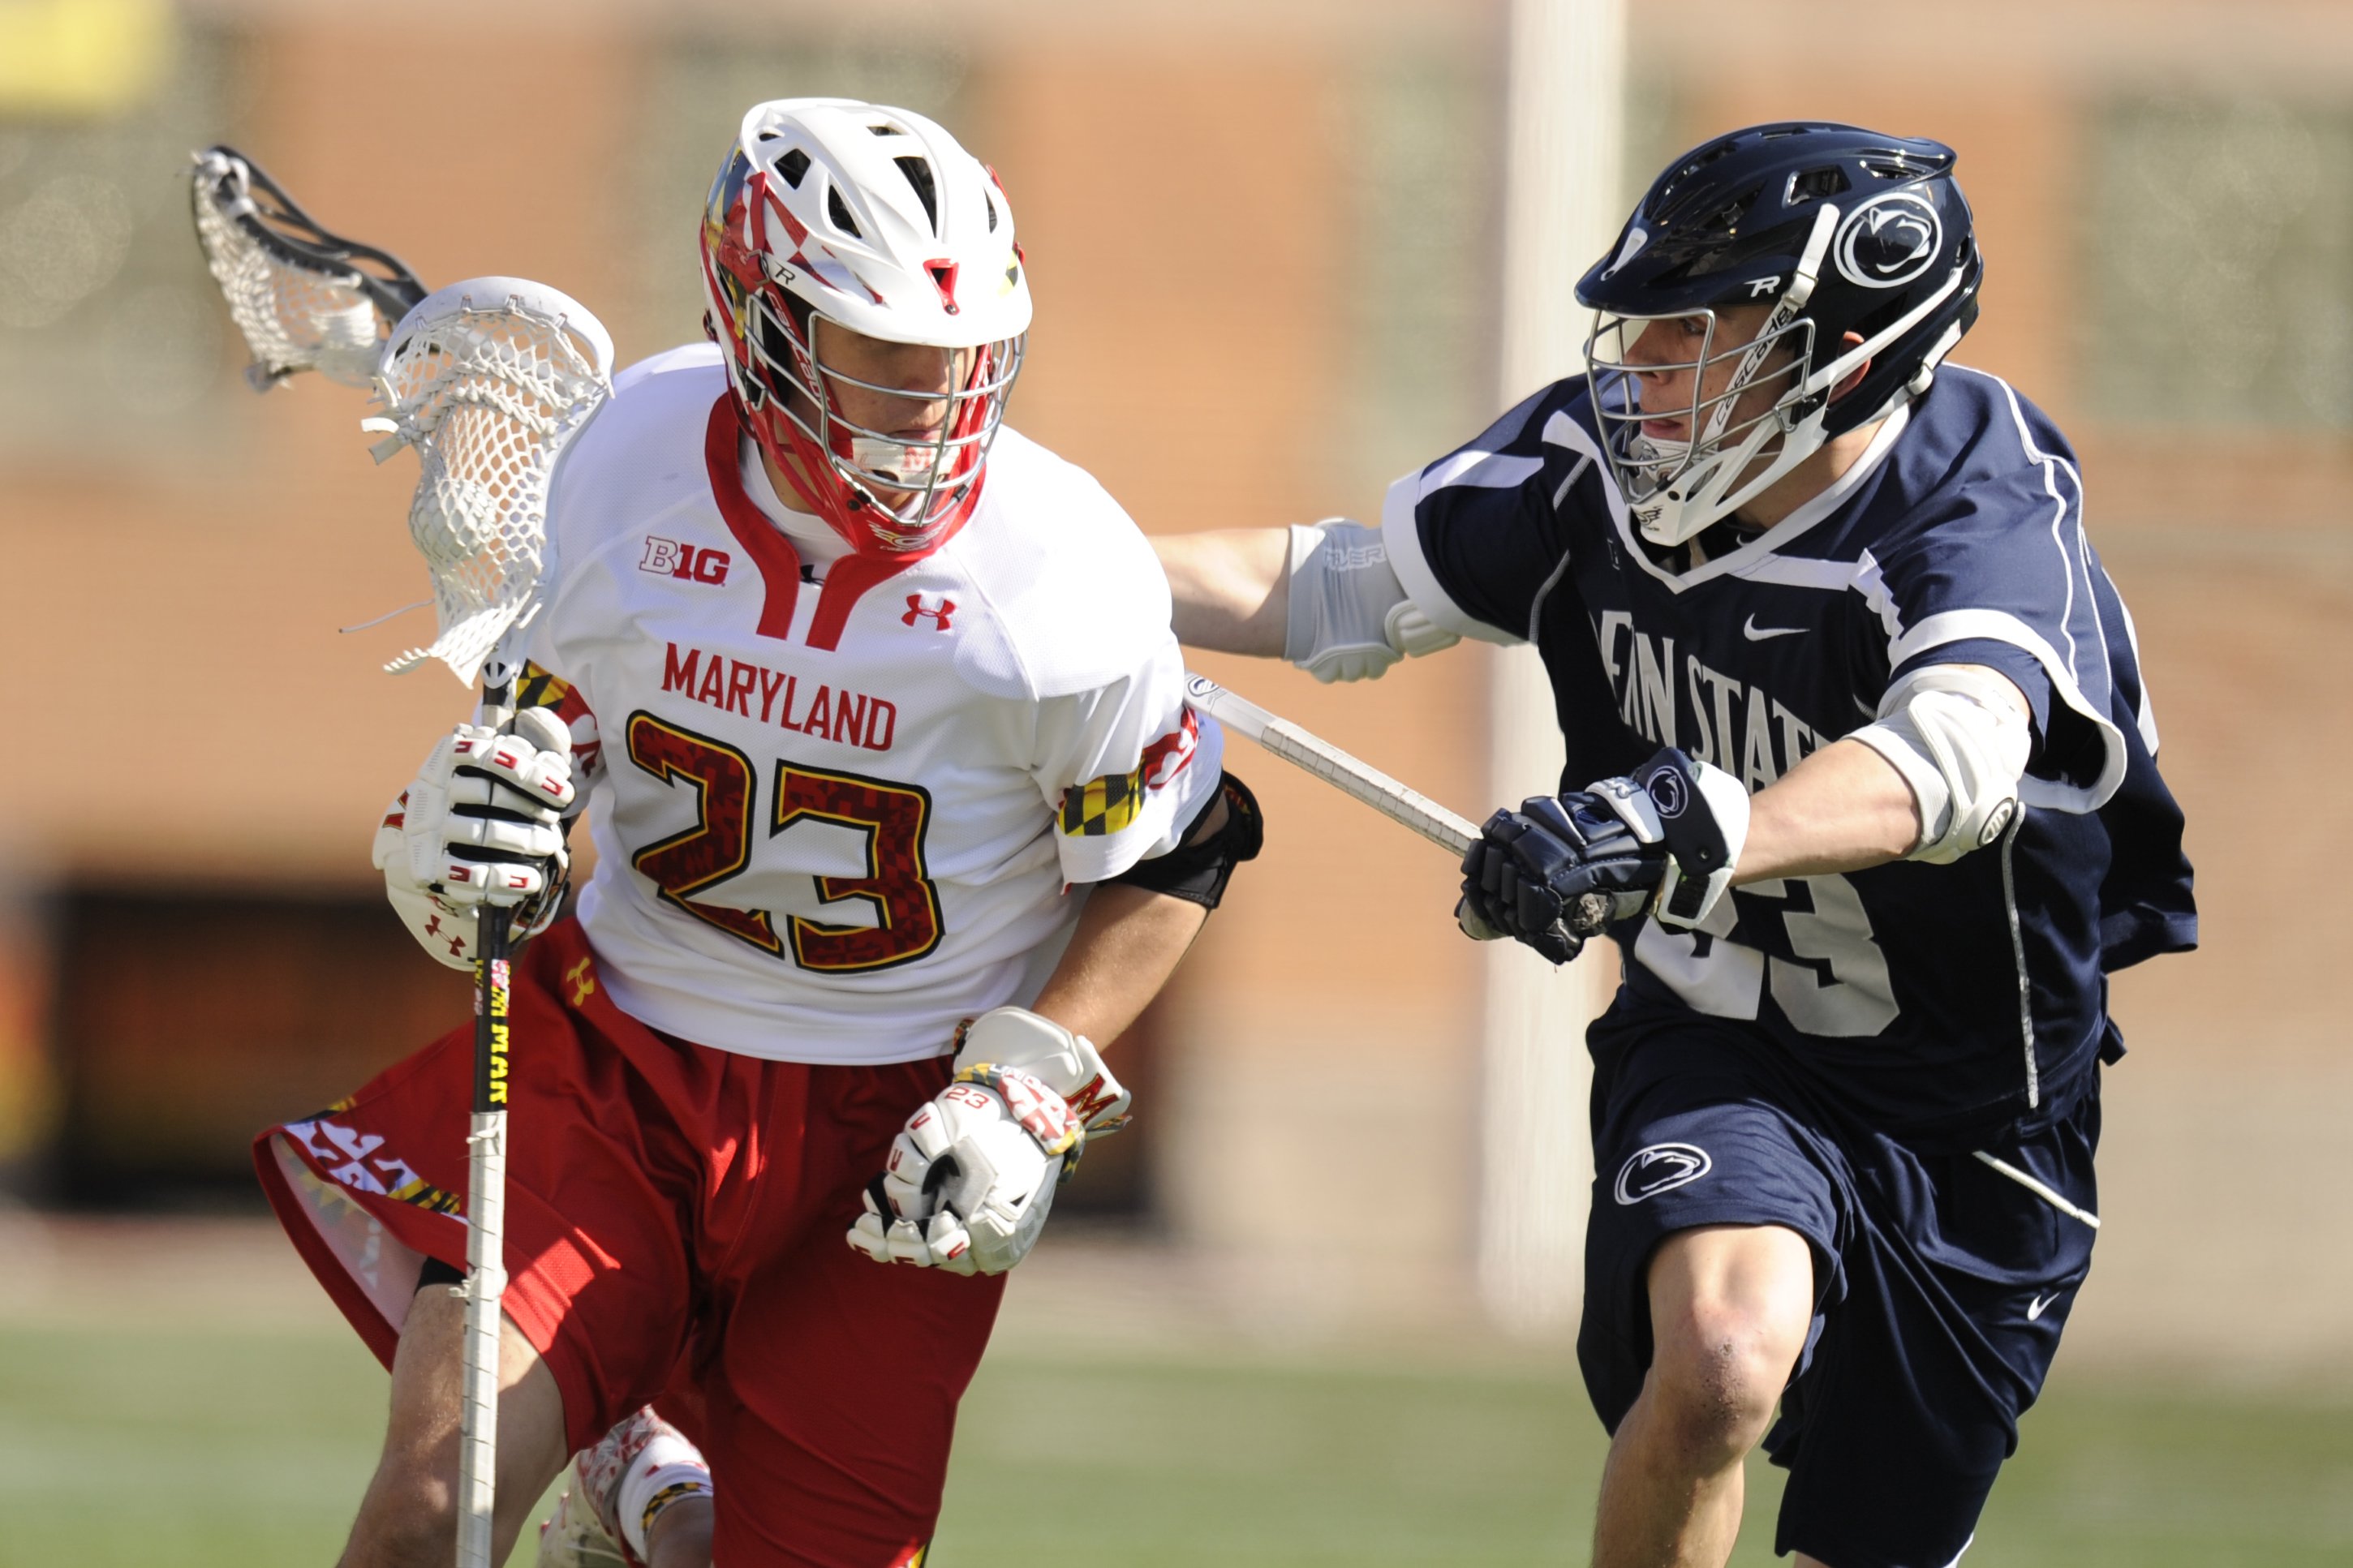 James Burke in blue jersey number #23 and Adam DiMillo in red and white jersey #23 pictured during a lacrosse game at Capital One Field at Byrd Stadium on April 4, 2015, in College Park. | Source: Getty Images